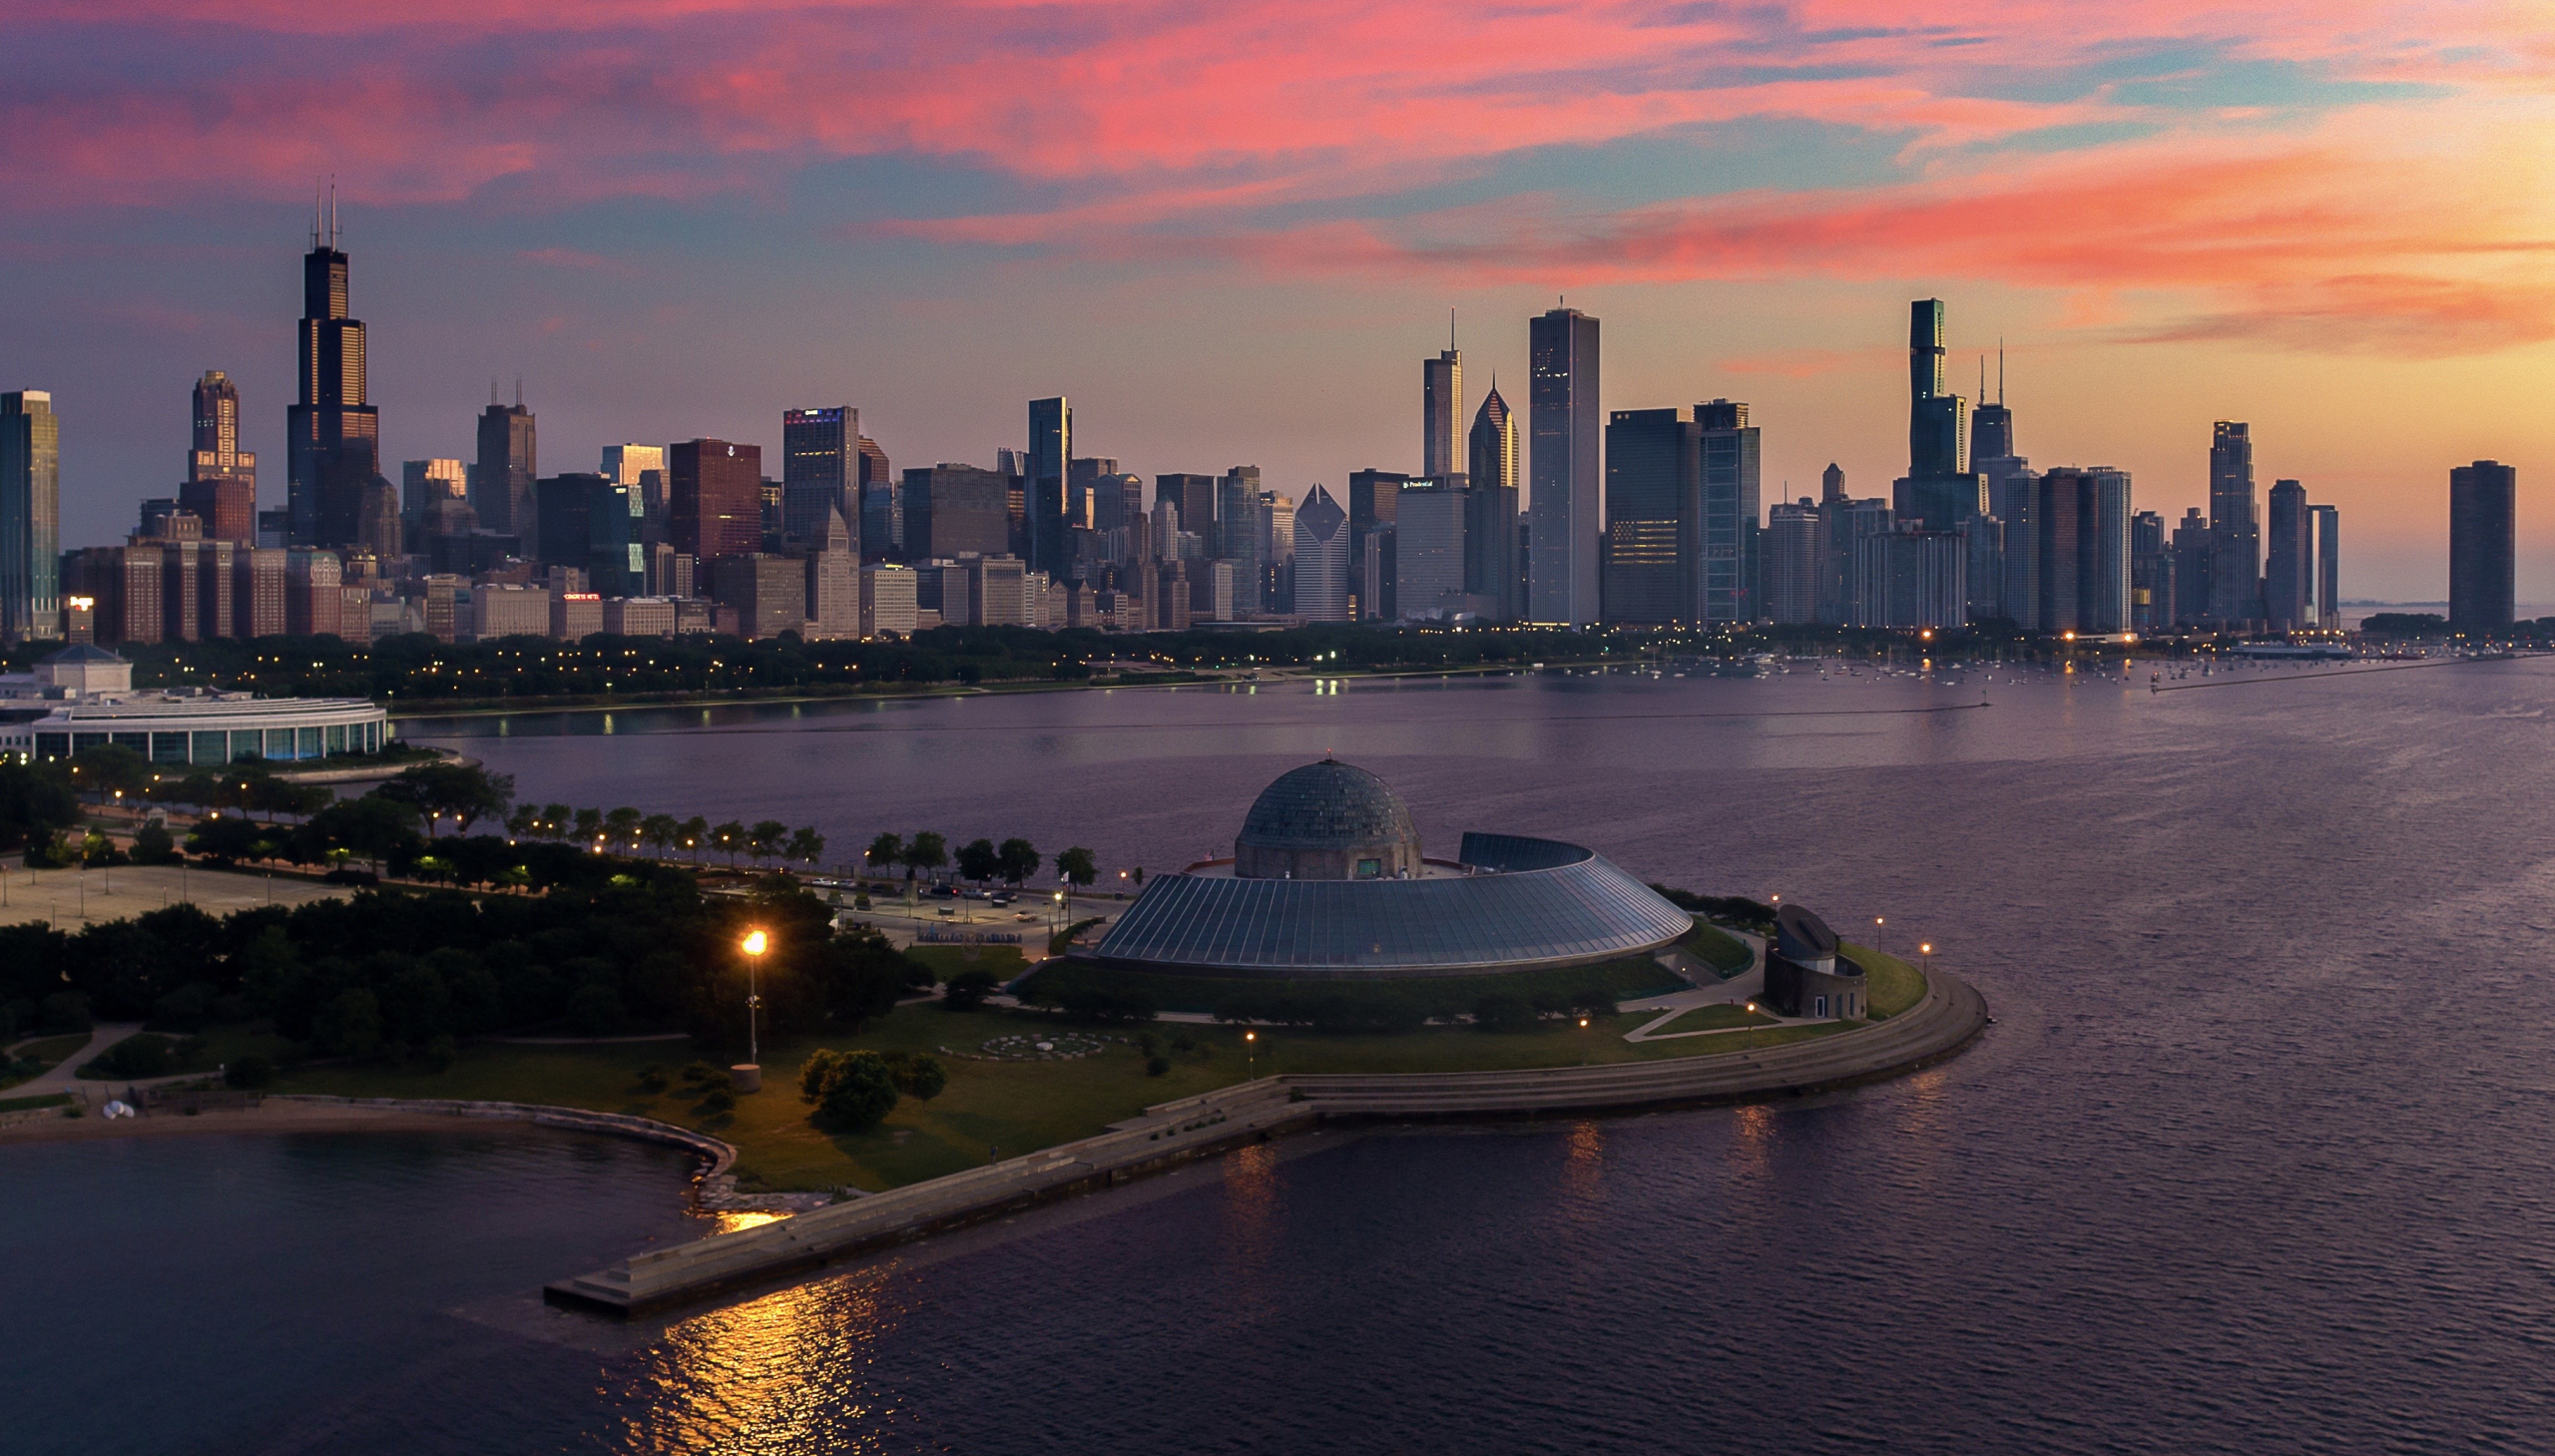 Chicago’s skyline ranked among top skylines in the world!